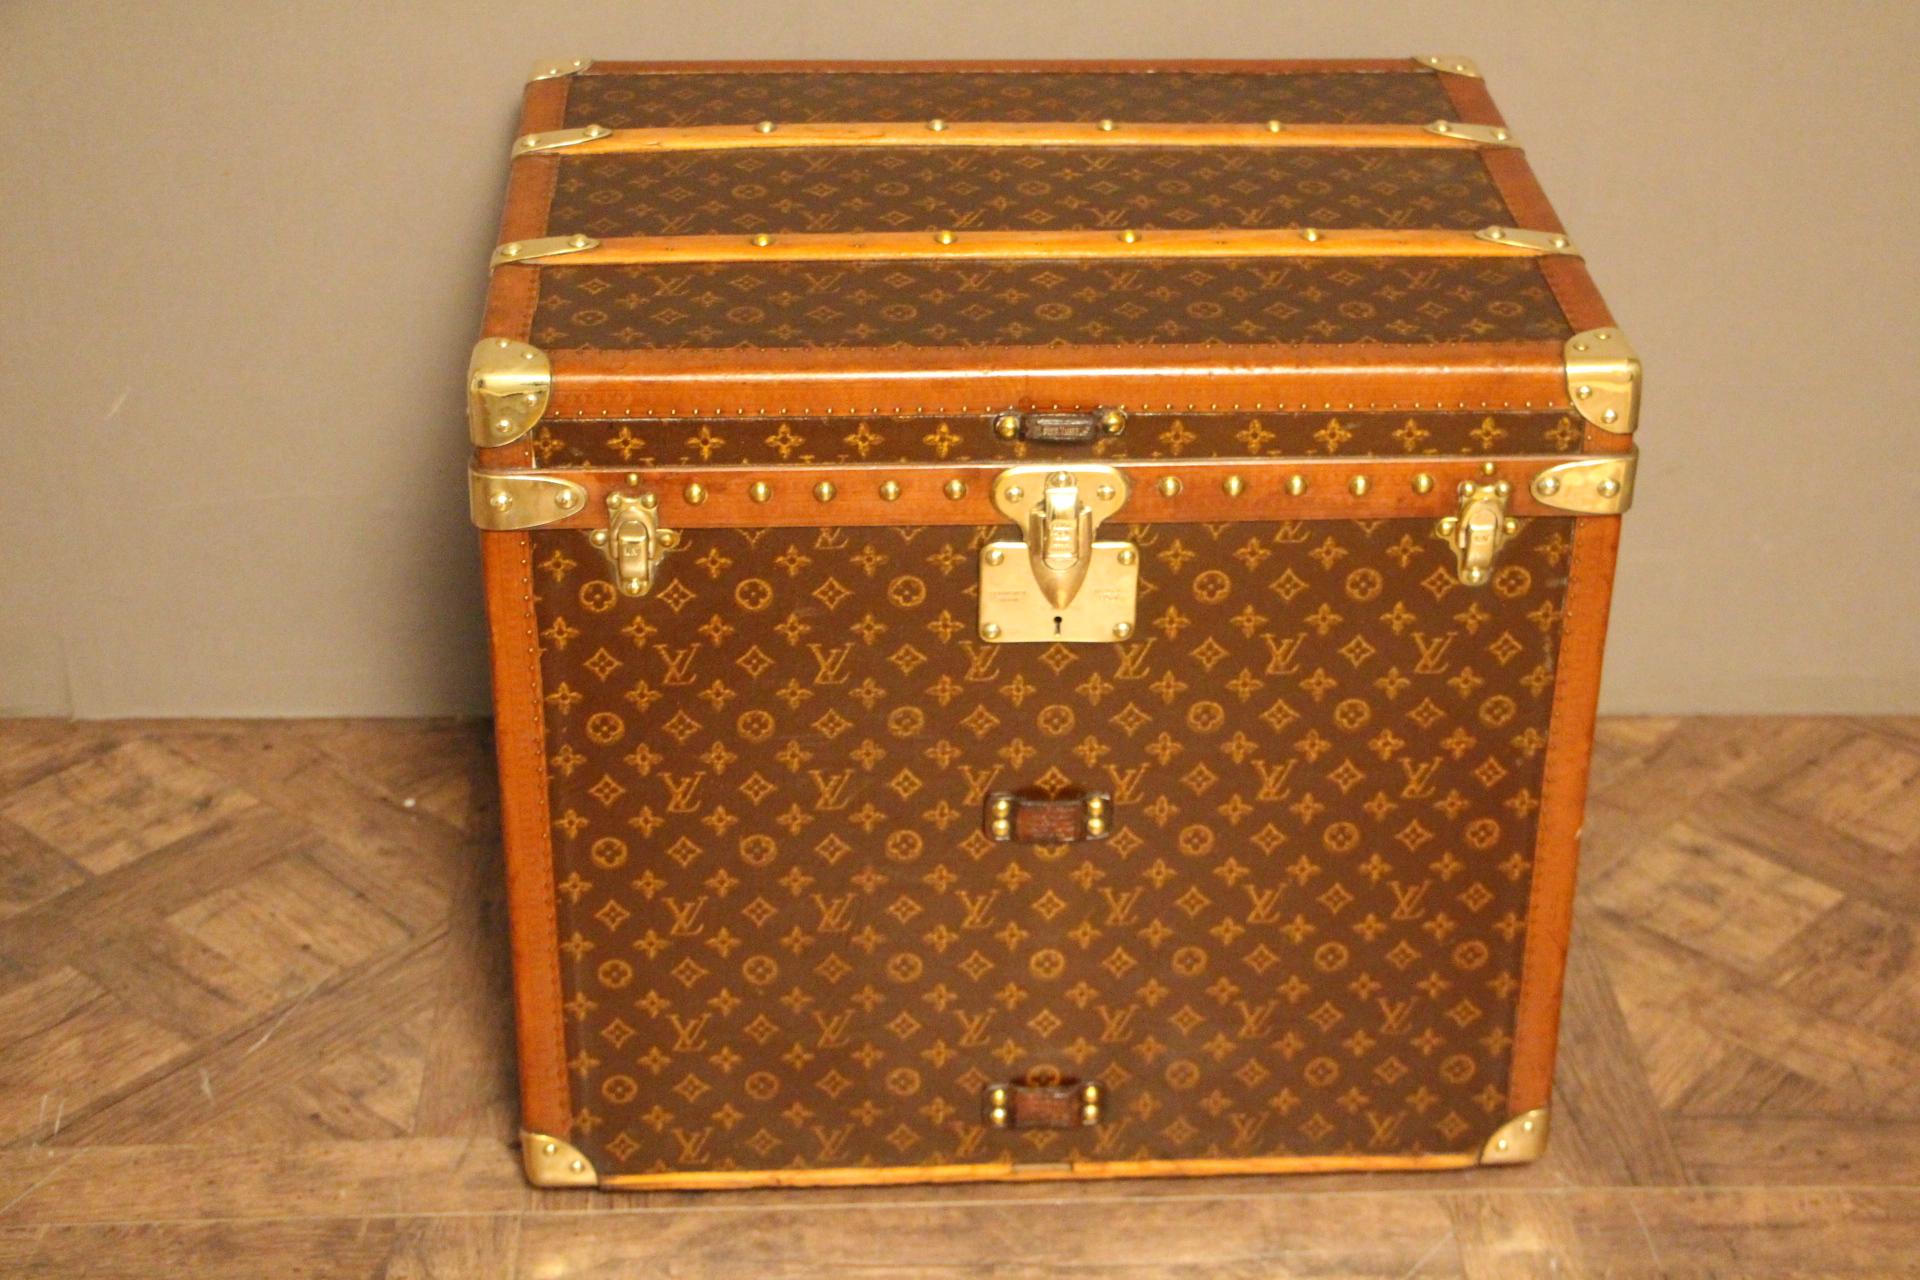 Very rare Louis Vuitton trunk in the very sought after shape.
All stencilled monograms.
Lozine trim, stamped Louis Vuitton locks and studs and leather handles.
Original inside lining. 2 original removable webbed baskets. Louis Vuitton sticker